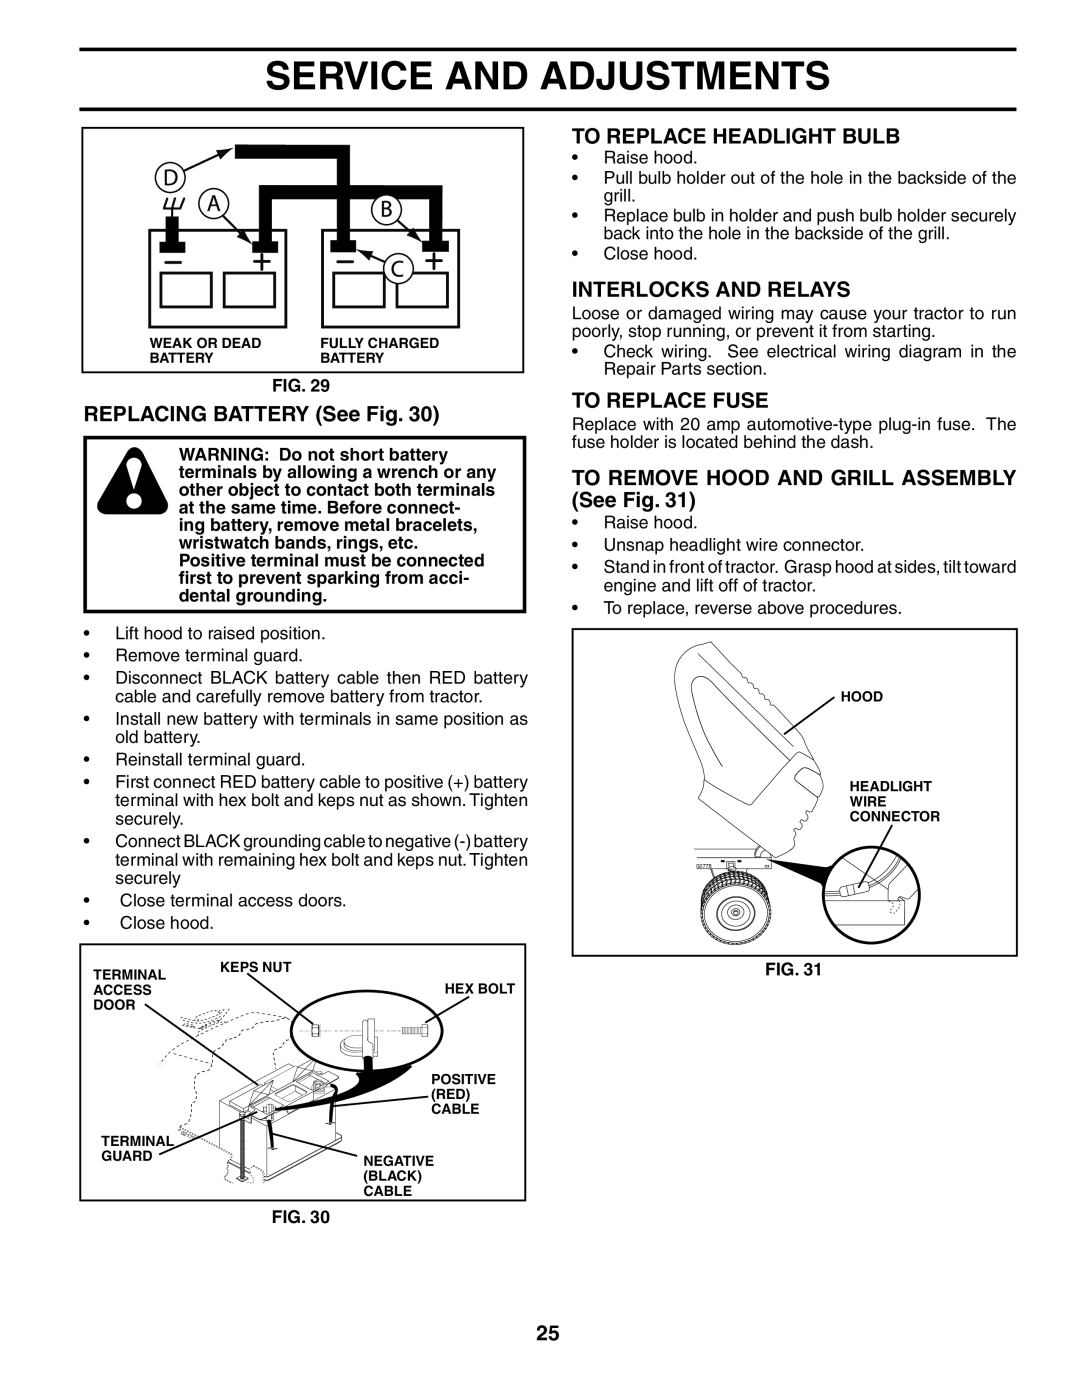 Husqvarna YTH2148 owner manual To Replace Headlight Bulb, Interlocks And Relays, REPLACING BATTERY See Fig, To Replace Fuse 